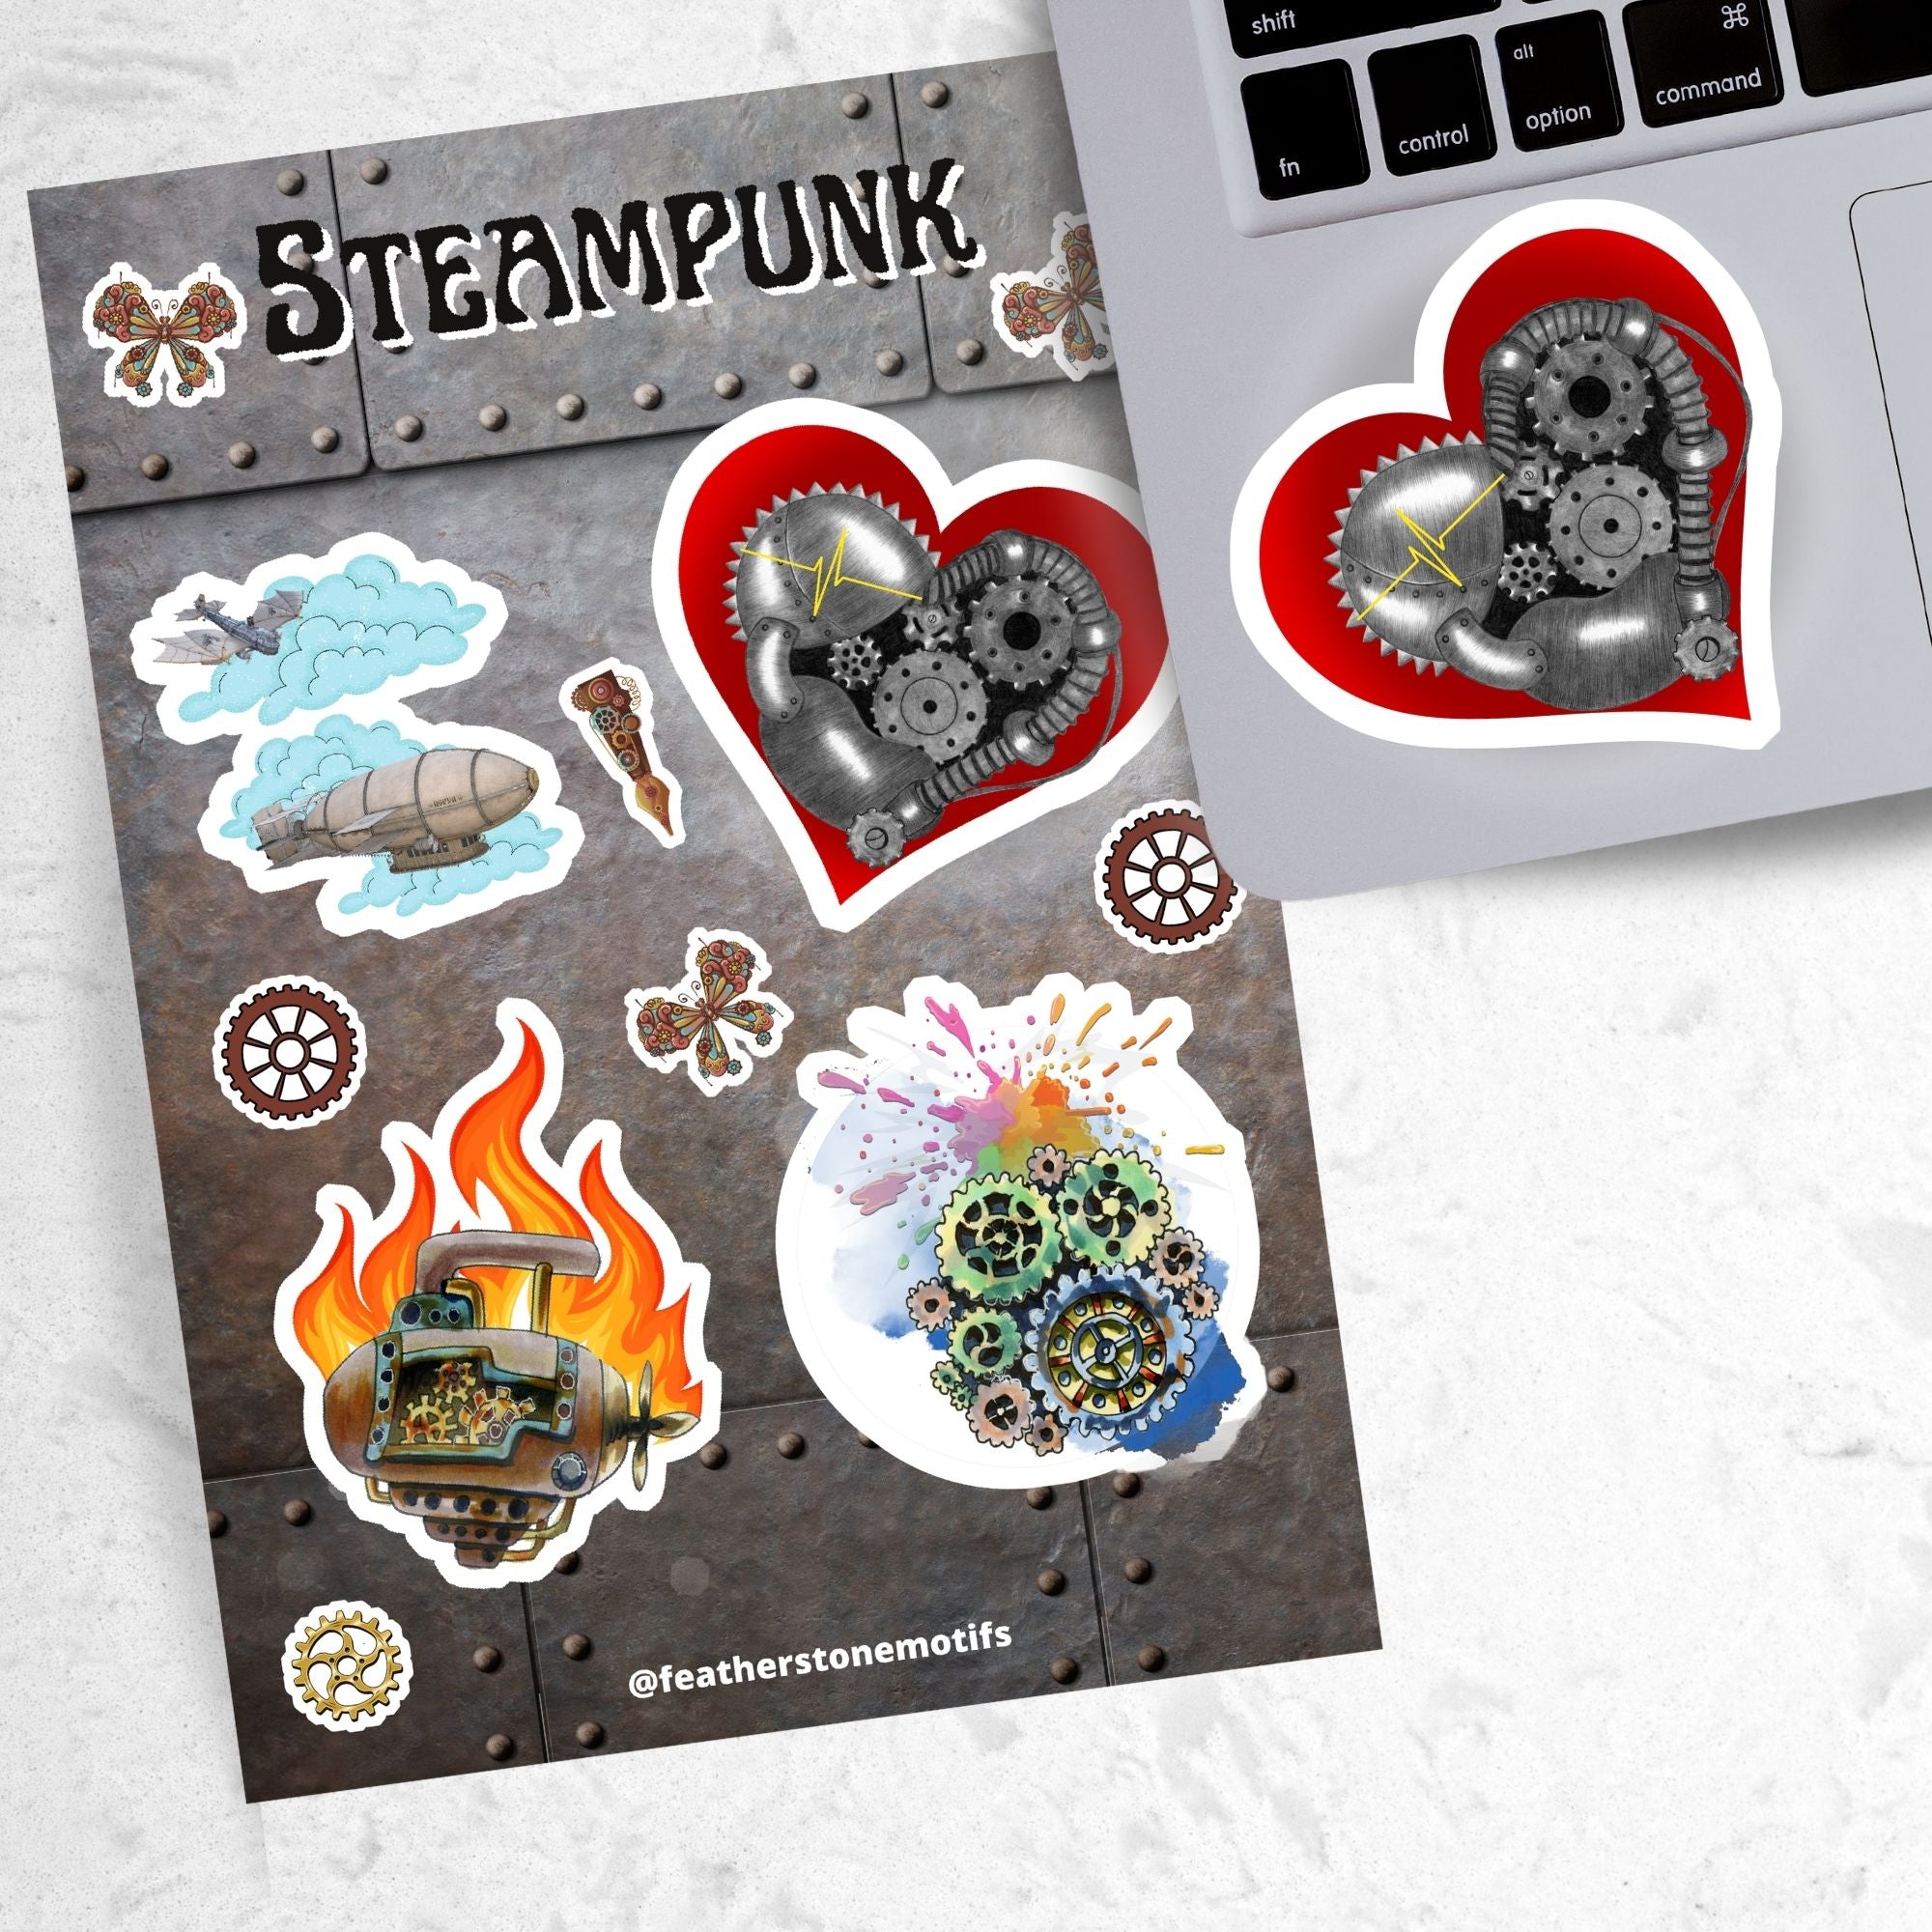 This Steampunk sticker sheet features four large mechanical images: Steampunk Flyers, Steampunk Heart, Steampunk Engine with flames, and Steampunk Engine in pastel, along with smaller miscellaneous gear, butterfly, and pen stickers.  This images shows the sticker sheet next to an open laptop with the Steampunk Heart sticker applied below the keyboard.